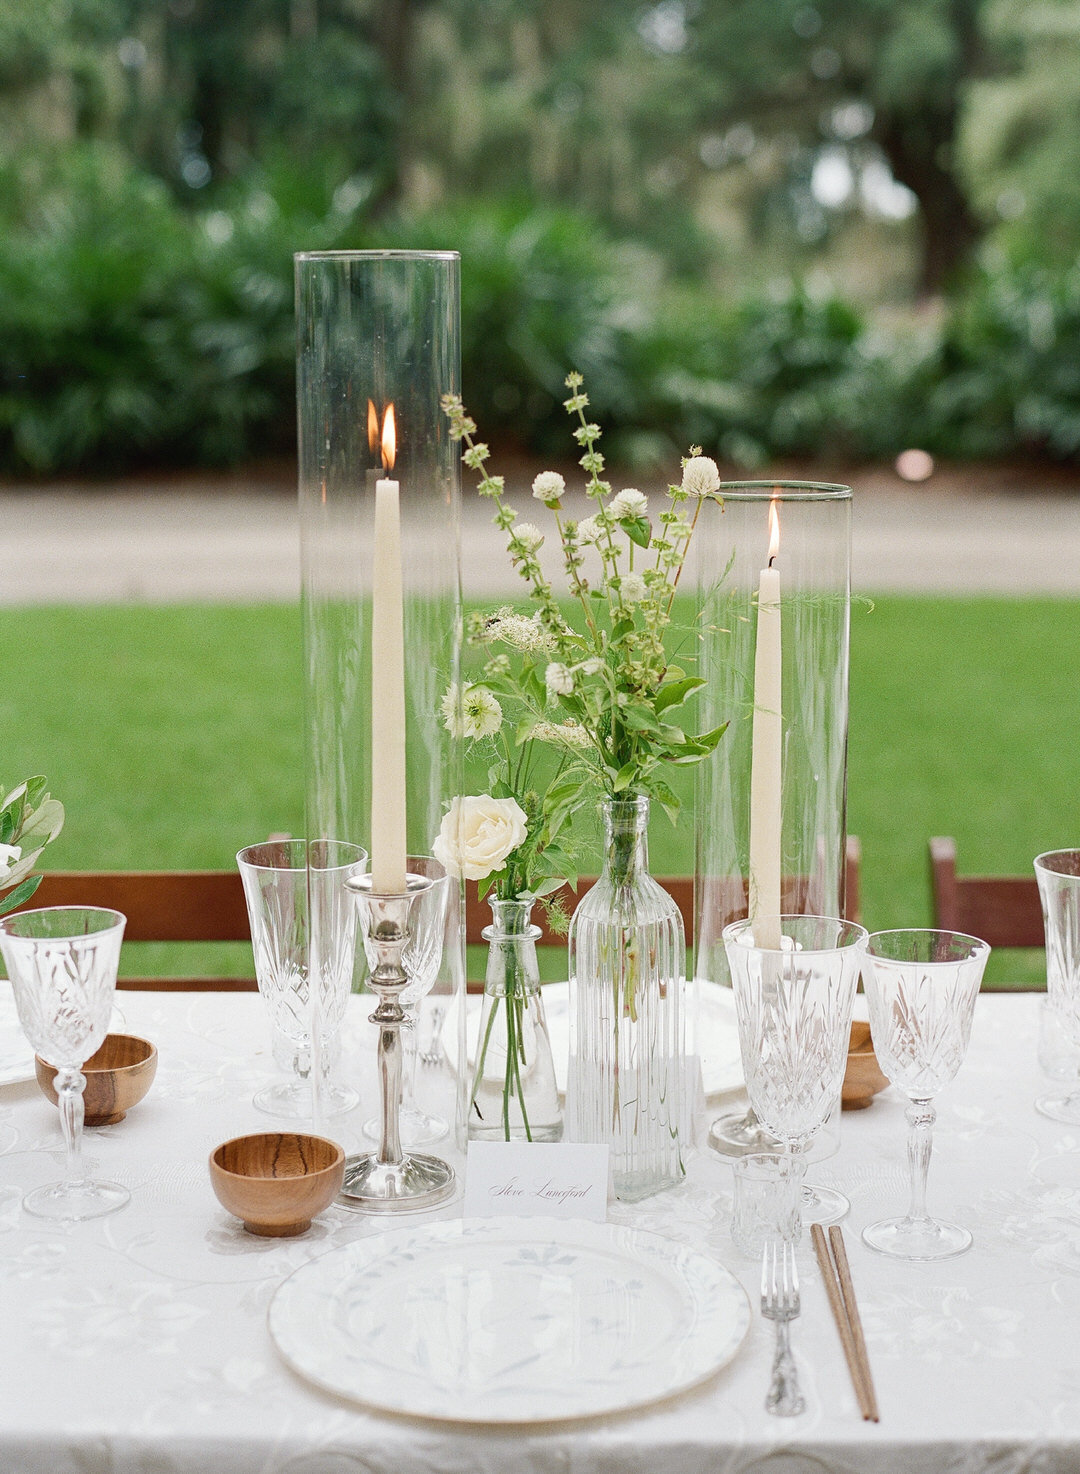 Wedding Reception table place setting with candles